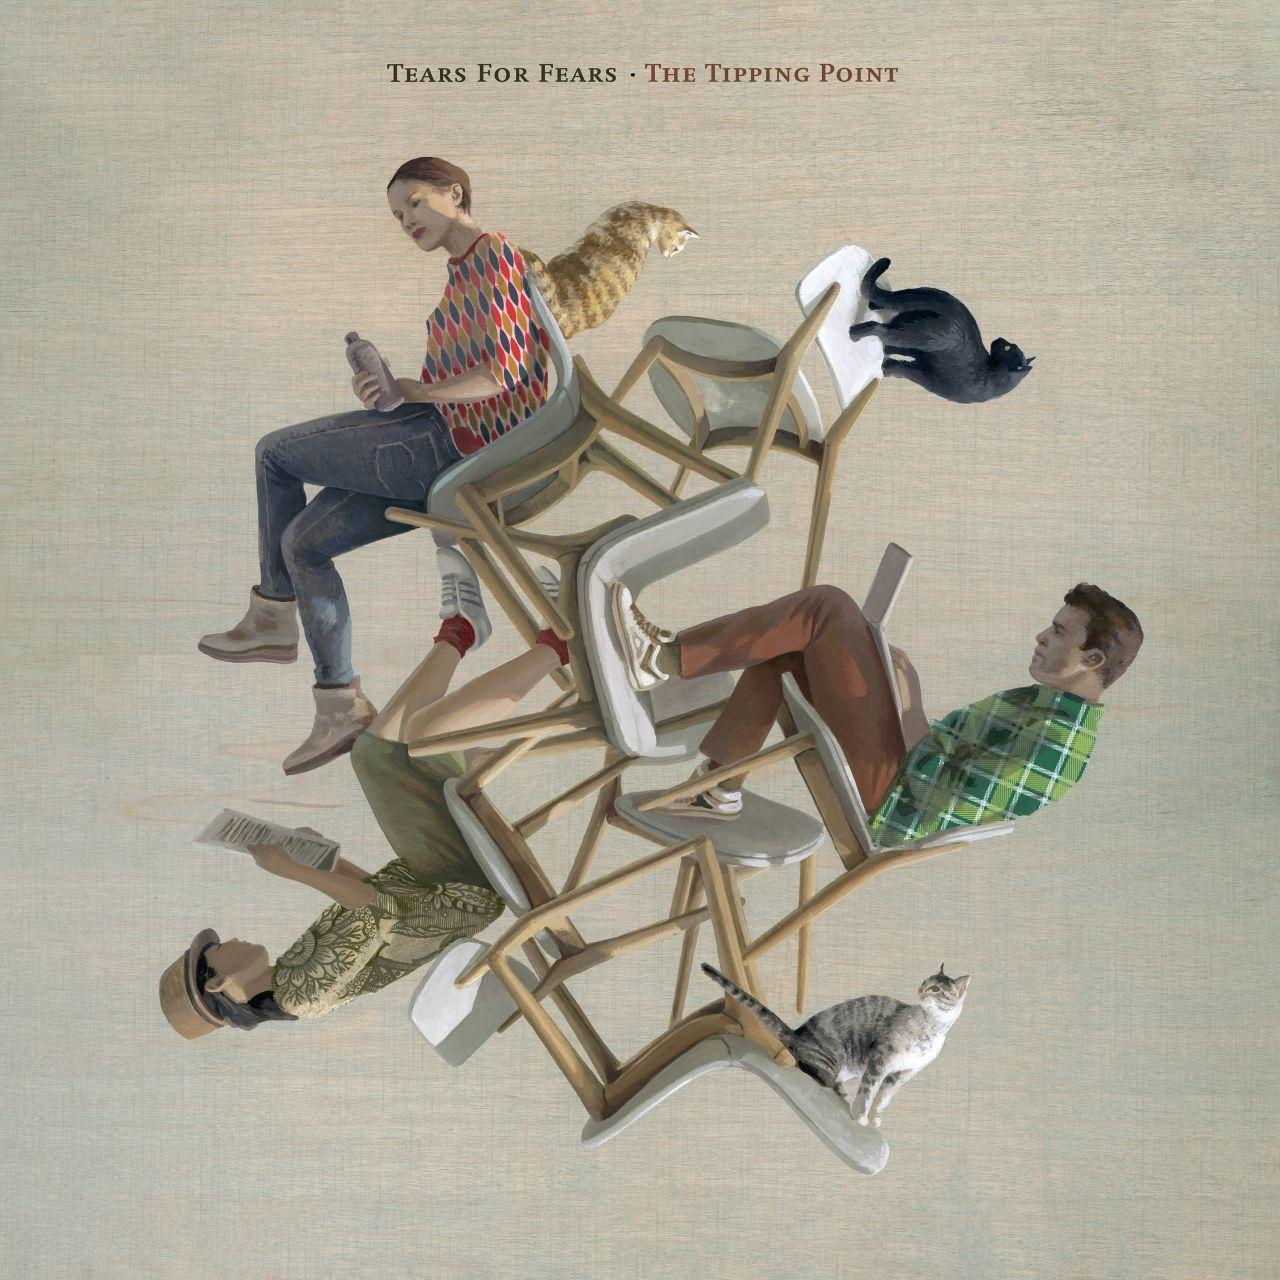 Tipping Tears Fears For The Point - - (CD)